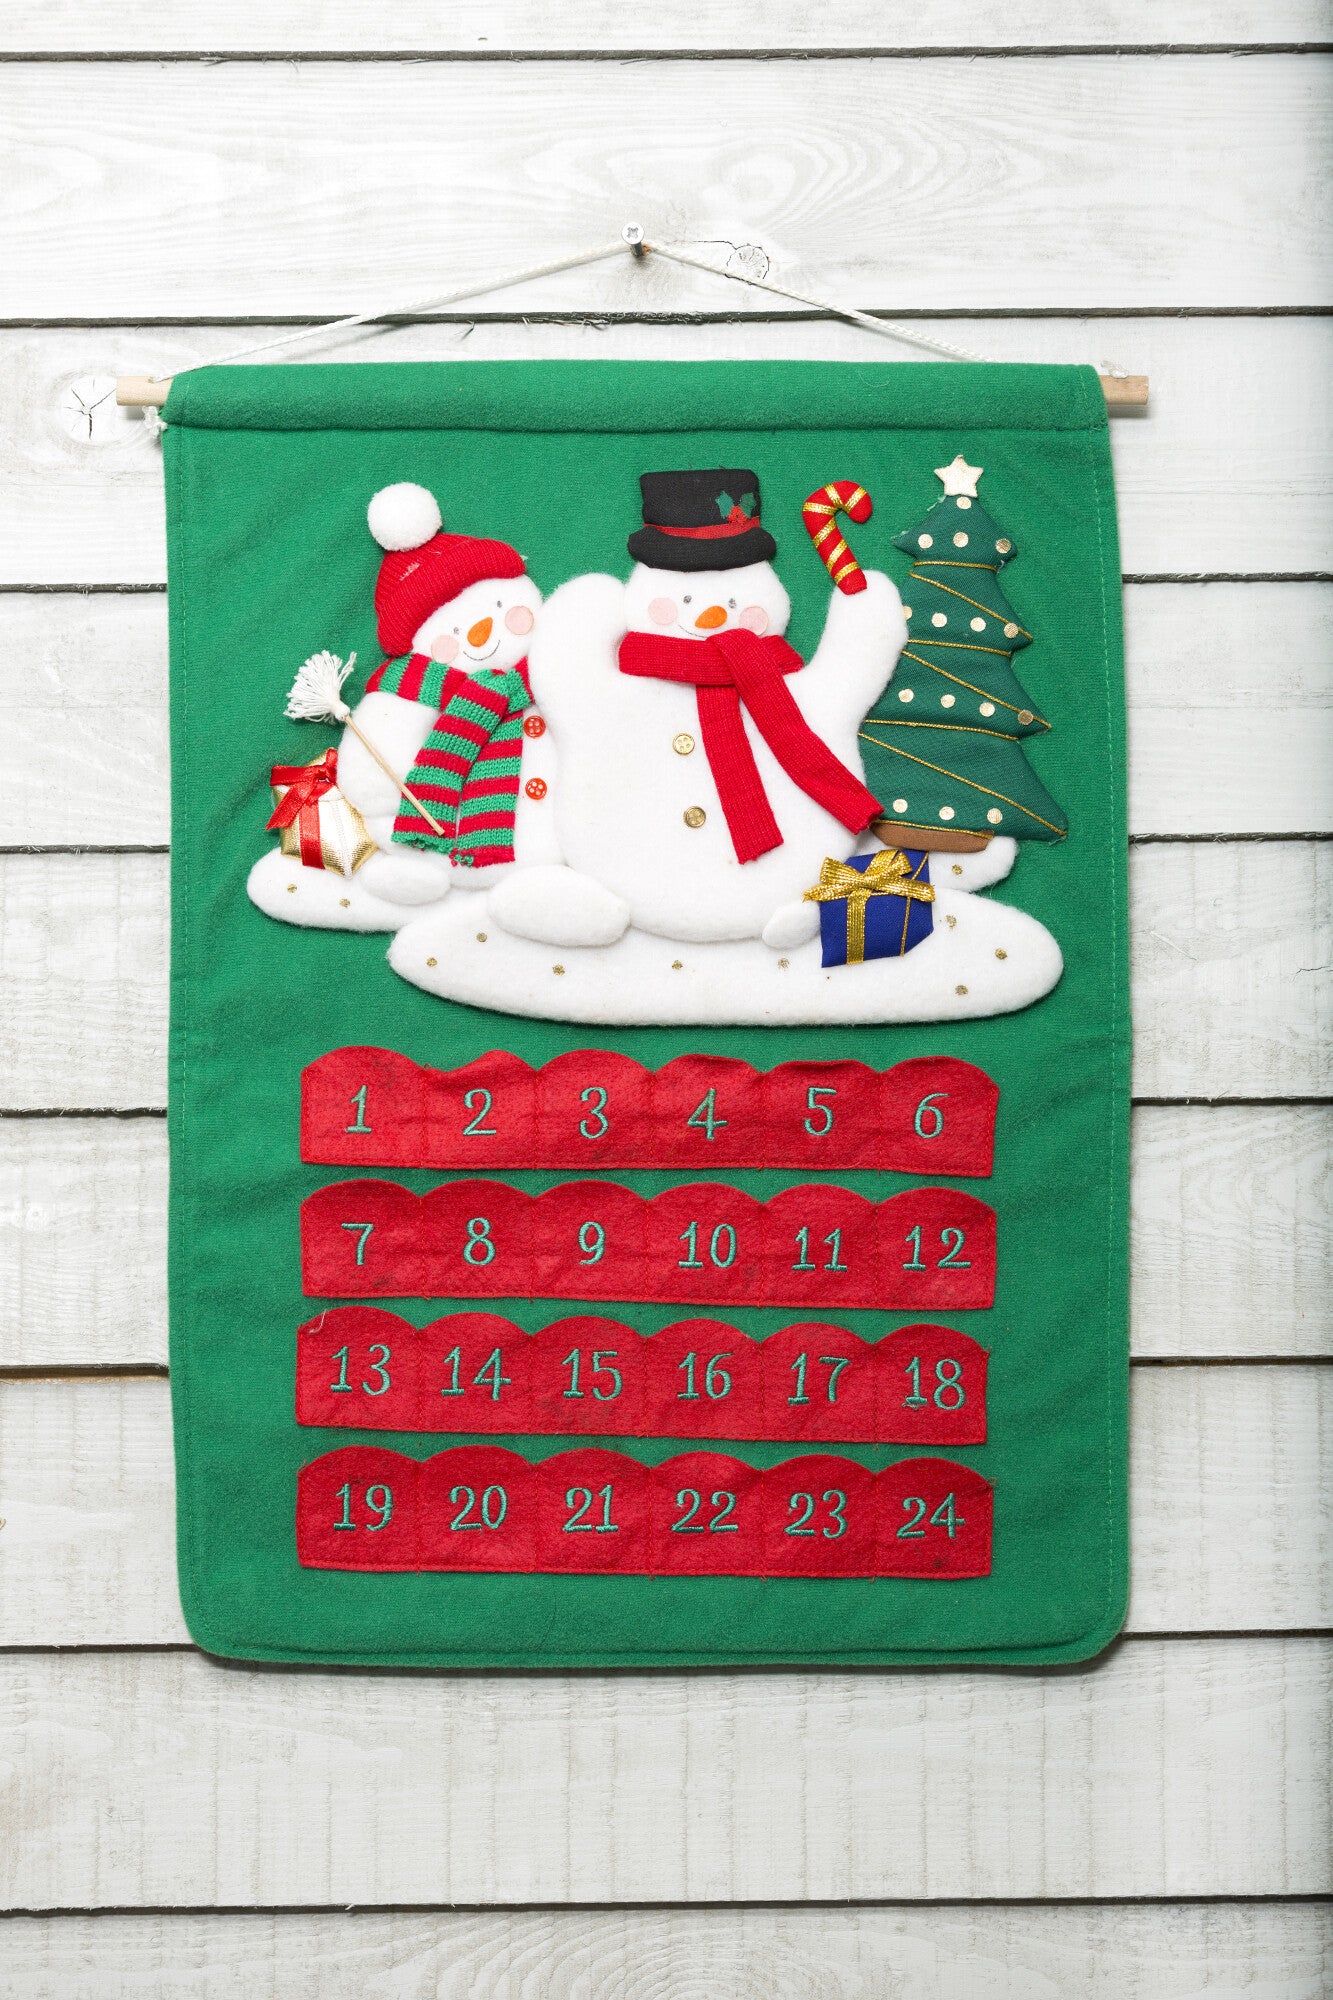 FiveAdvent Calendars to Give Your Friends www GiveThemBeer com